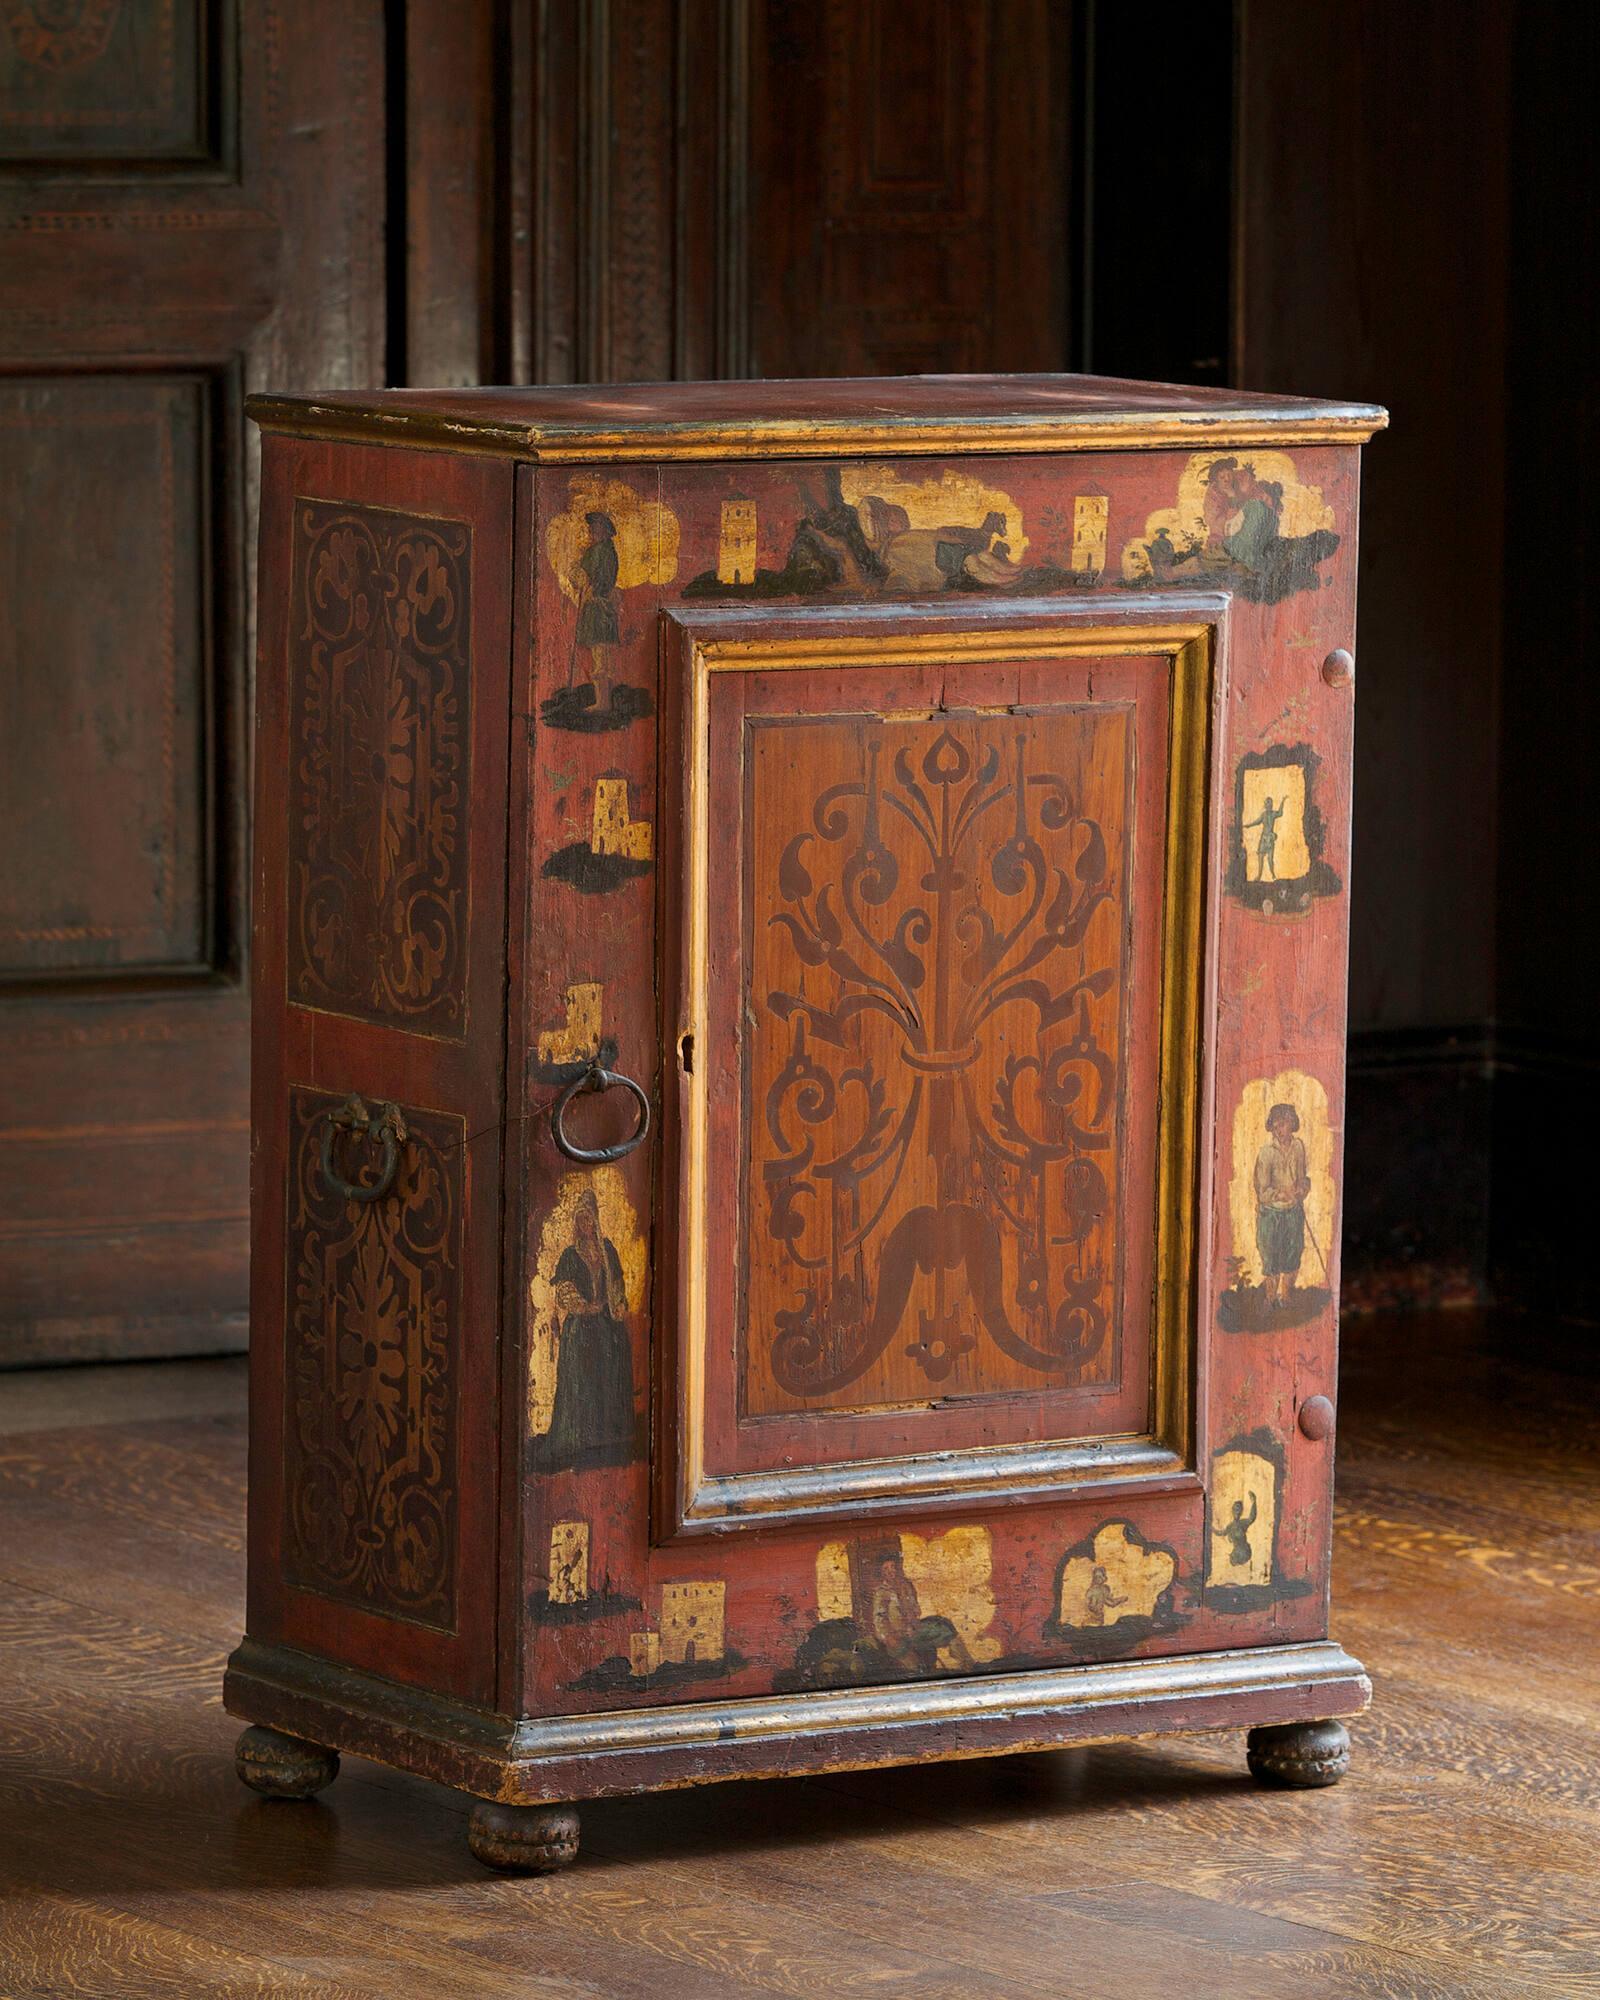 Eighteenth century Italian wooden cabinet from the Trentino-Alto Adige region of Italy. The cabinet has a door in the front, and it’s painted red with gold decoration and pastoral figures.